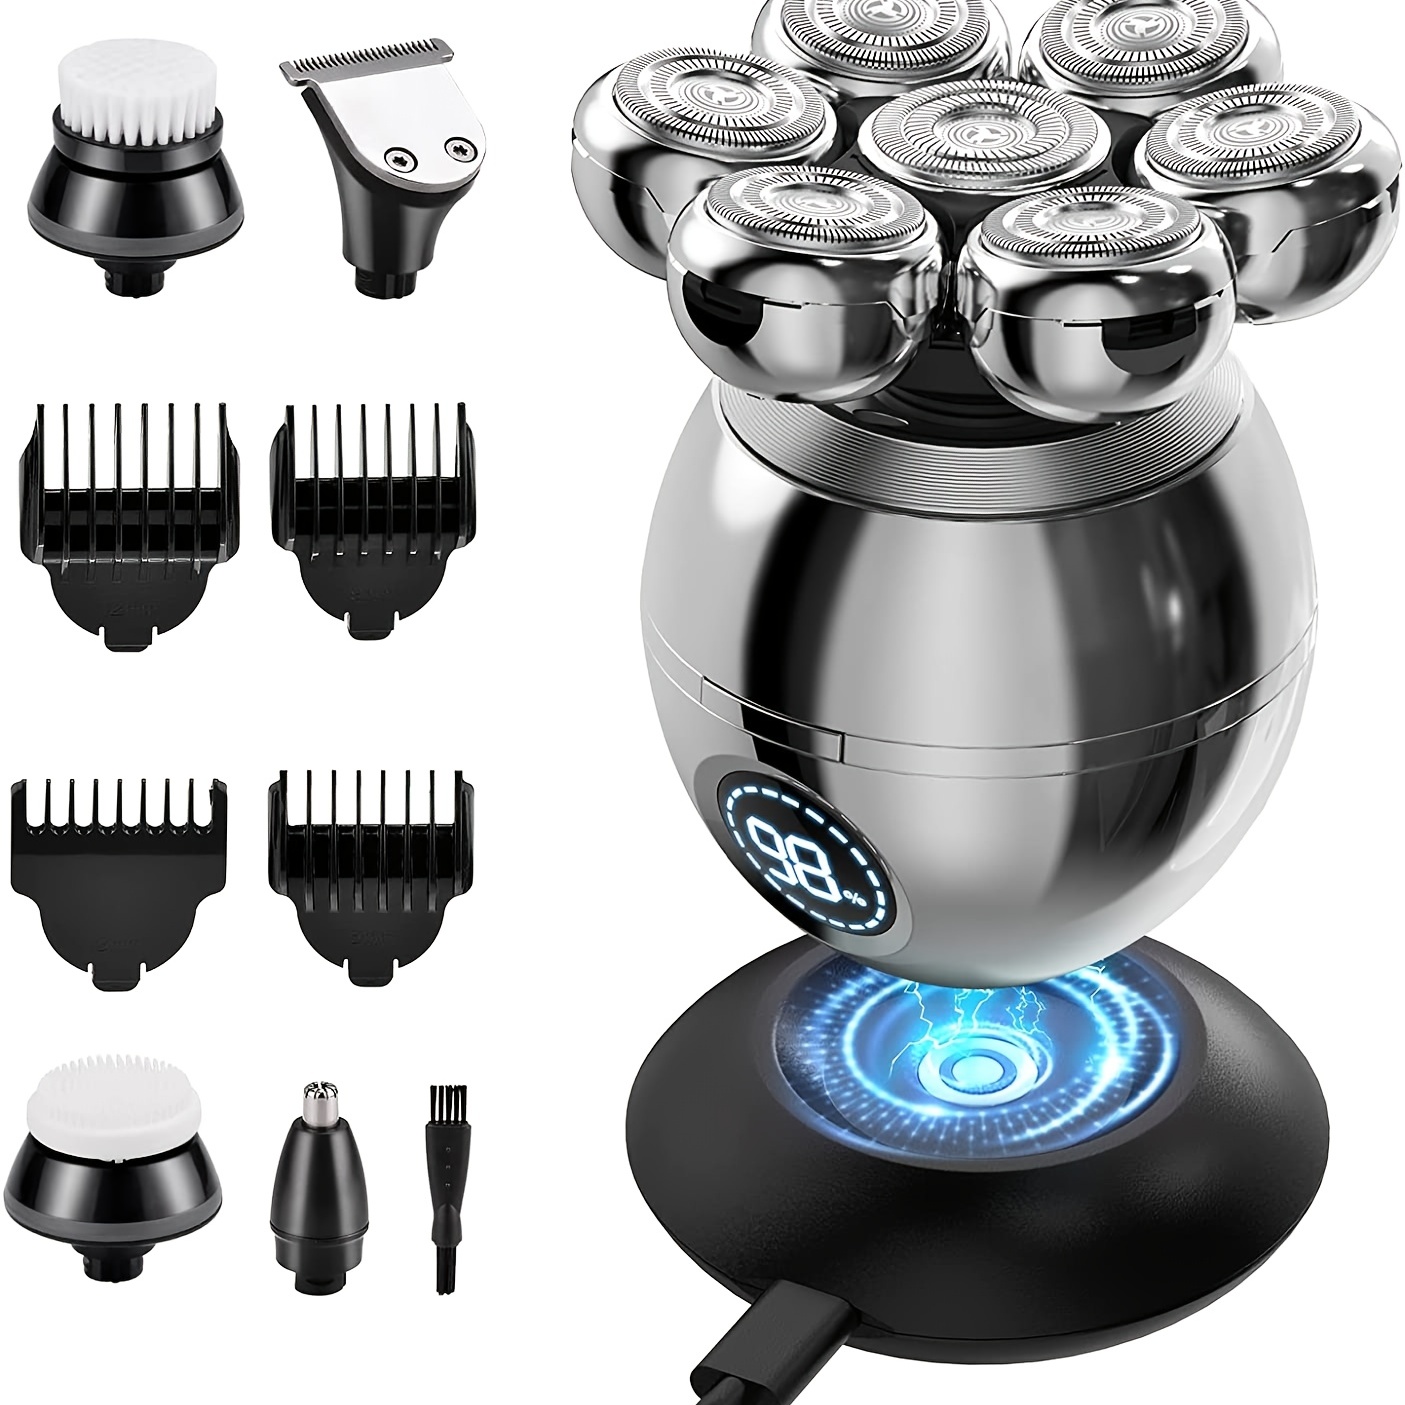 7D Head Shaver For Men - 6 in 1 LCD Display - Bald Head Shavers - Wet Dry Electric Razor - Free Shipping & Returns